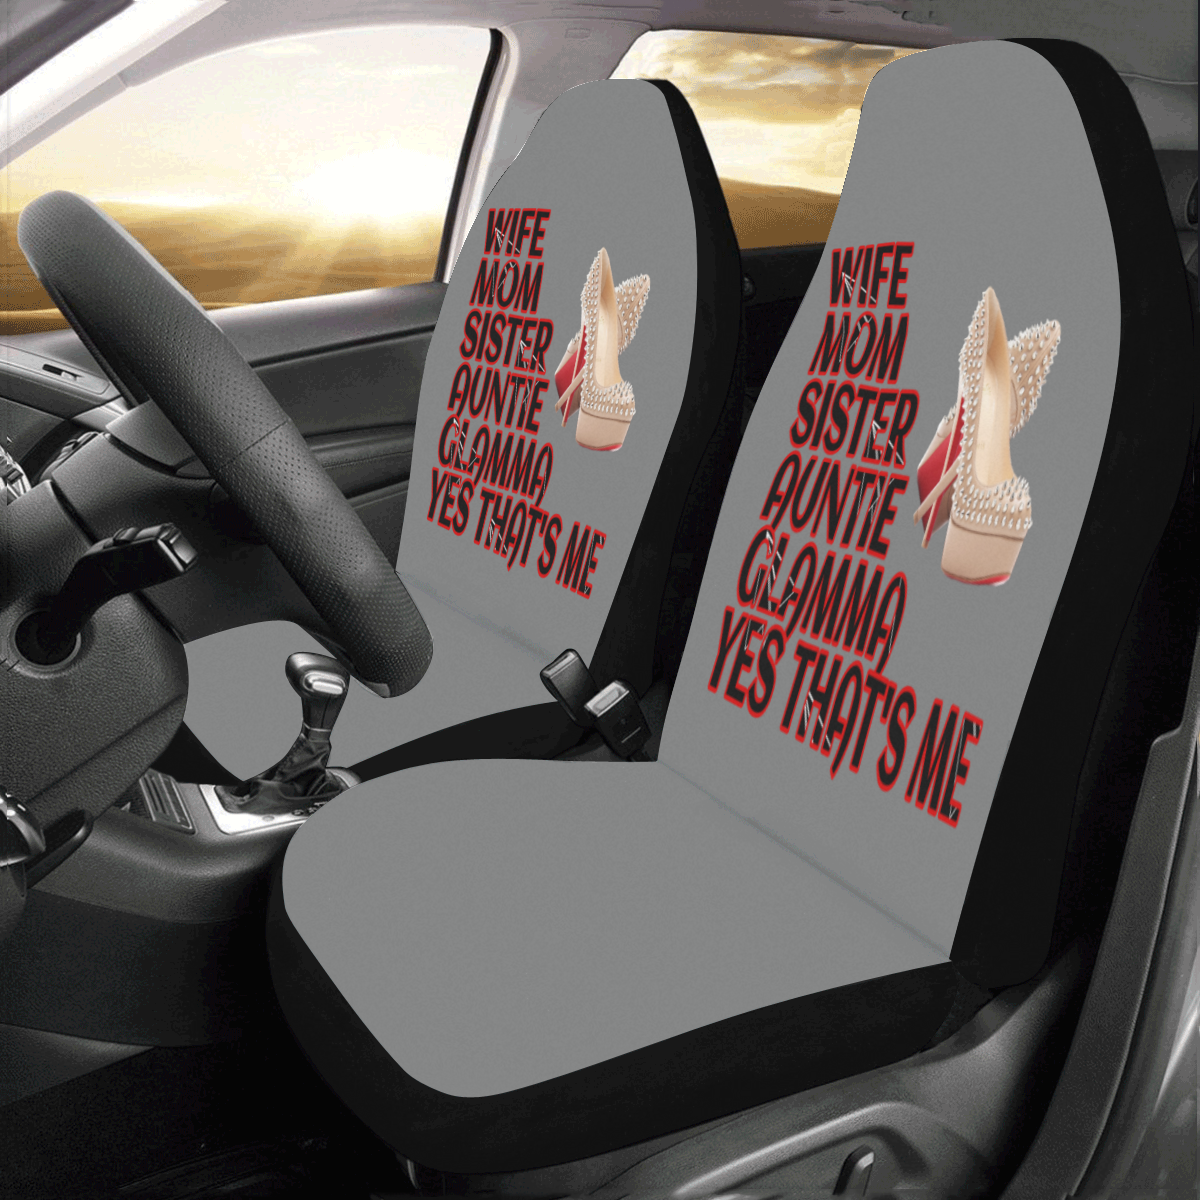 Gray Wife Sister Auntie Glamma Car Seat Covers (Set of 2)